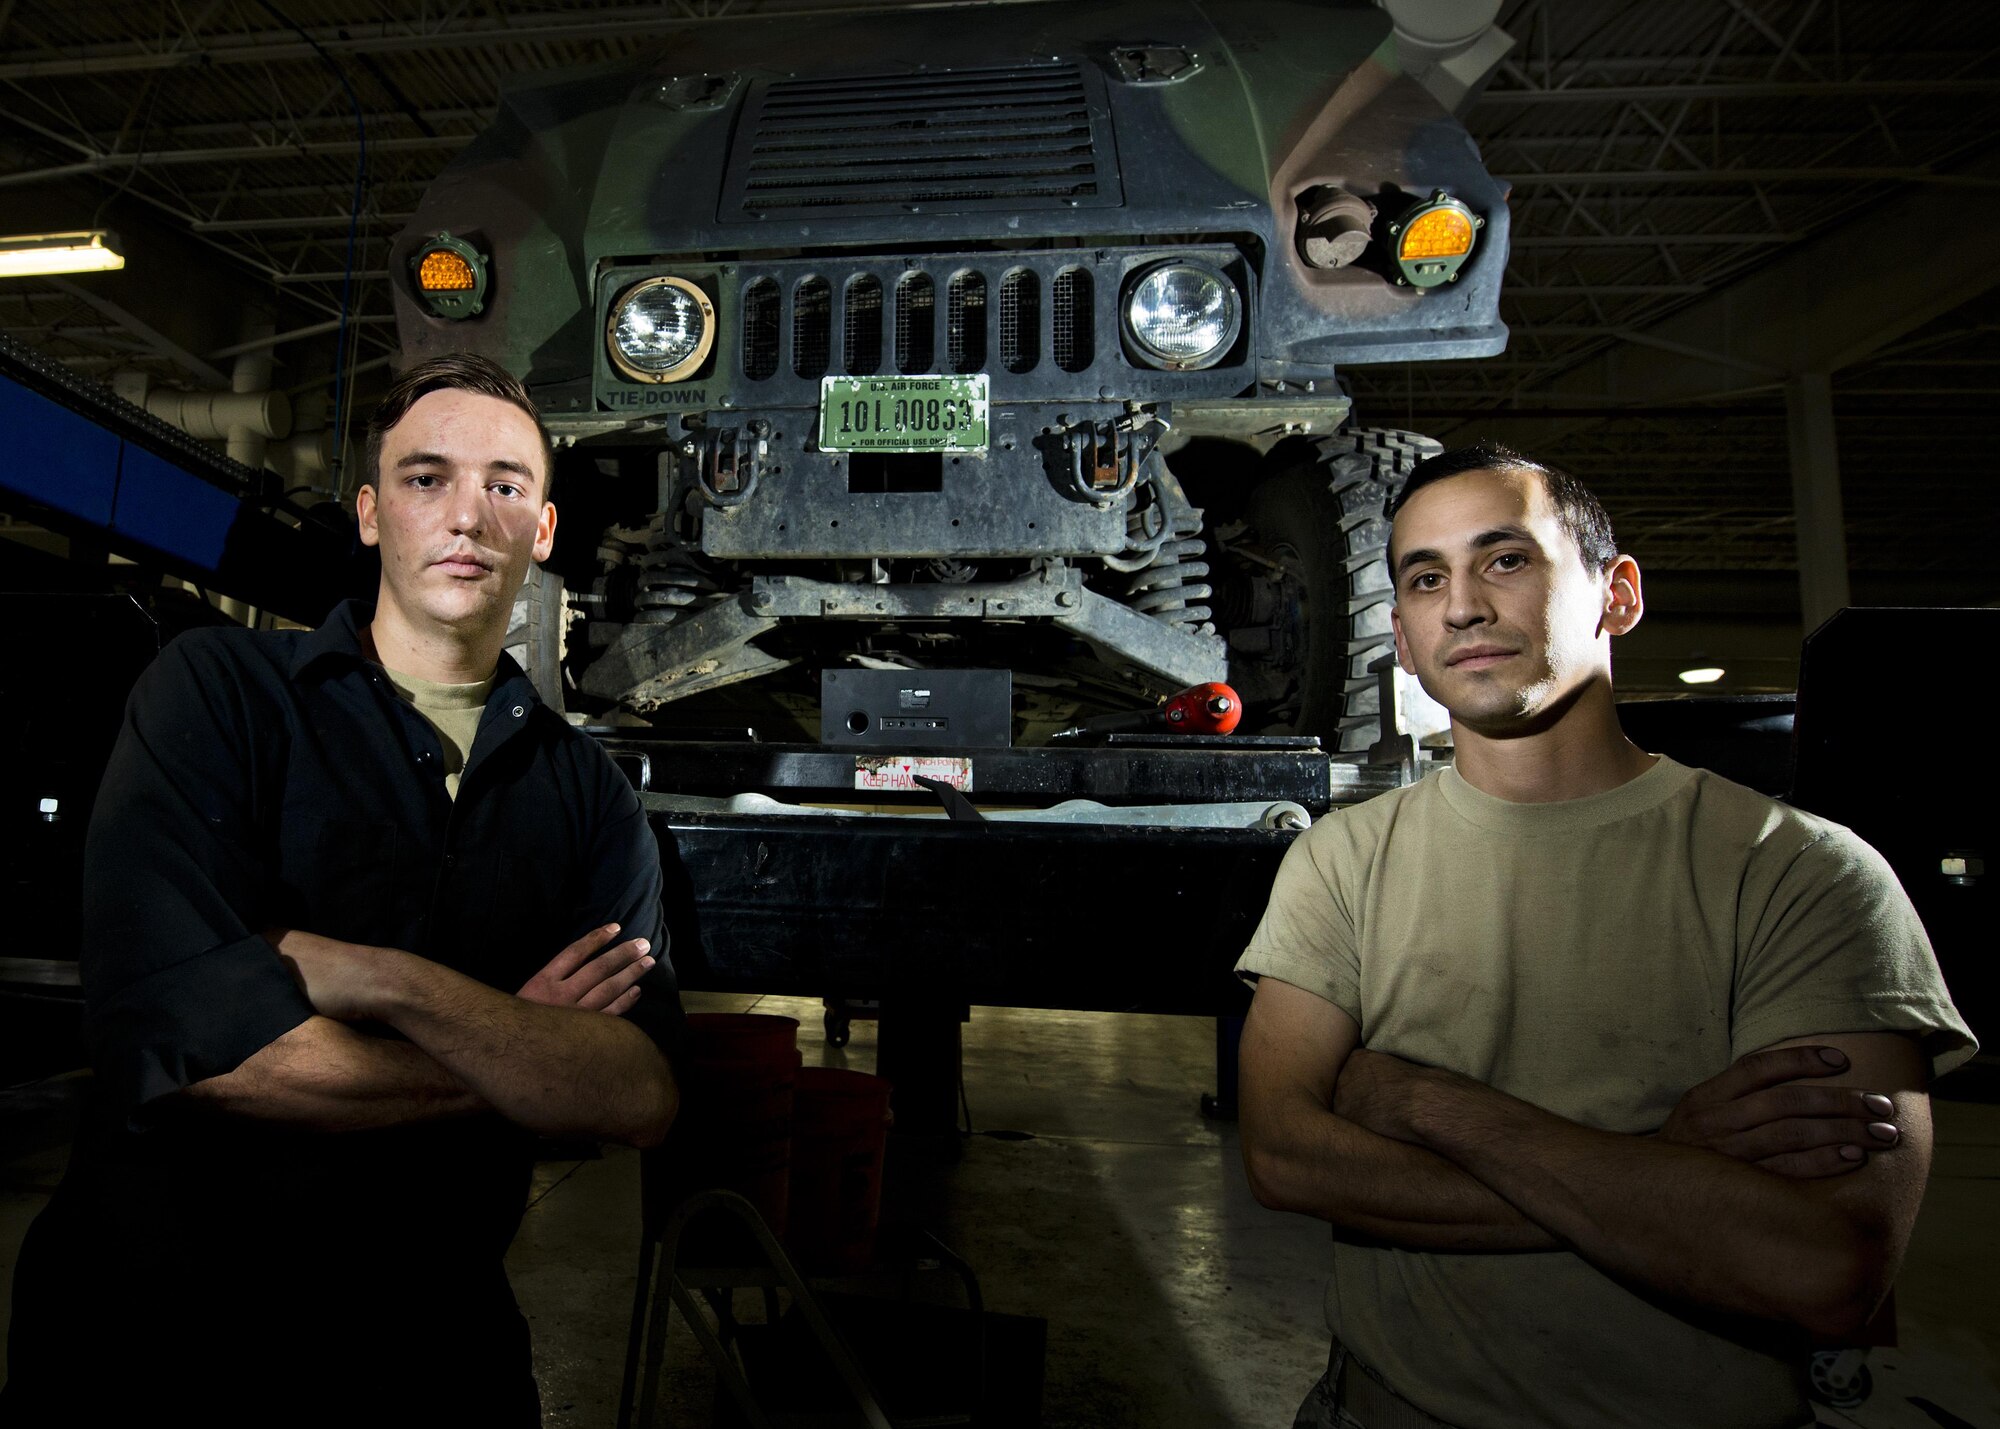 Senior Airman Logan Rivelli (left) and Staff Sgt. Adam Garcia, 5th Logistics Readiness Squadron vehicle maintenance technicians, pose for a portrait in front of a Humvee in the Defender Dome at Minot Air Force Base, N.D., July 28, 2016. Airmen from the 5th LRS vehicle maintenance flight work to ensure that Team Minot stays mobile. (U.S. Air Force photos/Airman 1st Class J.T. Armstrong)